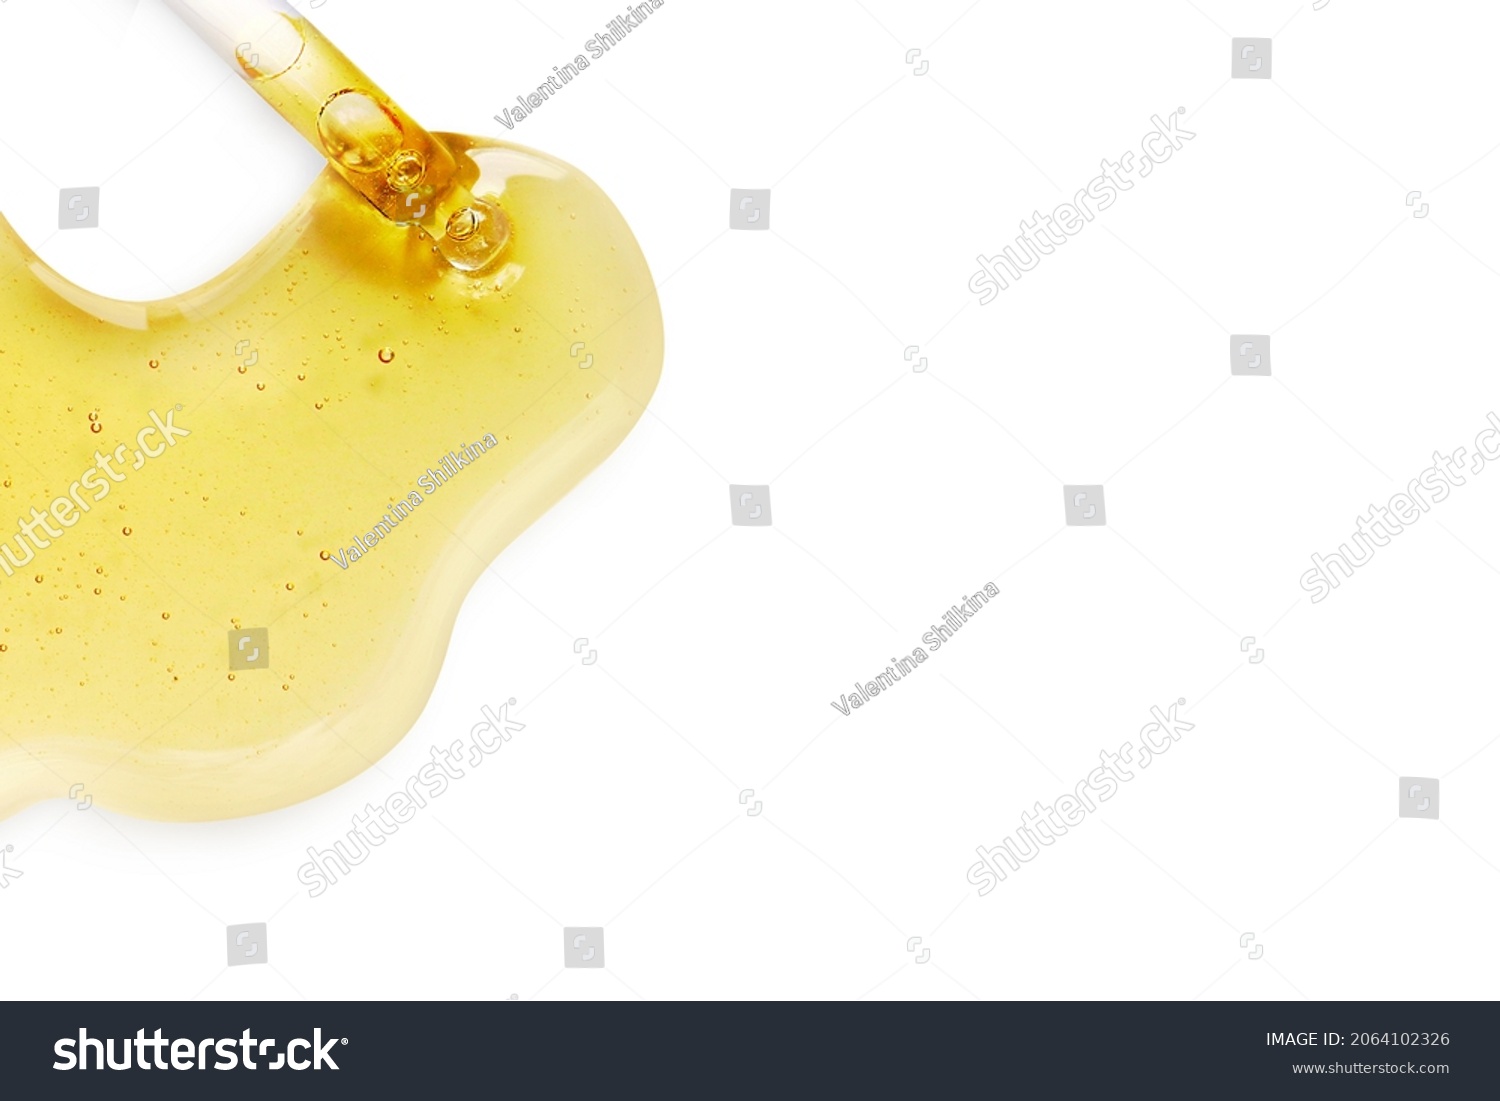 Yellow texture of a drop of whey or olive oil on a white background. Transparent sample of cosmetic gel with bubbles. Golden acid cream. Vitamin c. A drop of honey. Hyaluronic acid. #2064102326